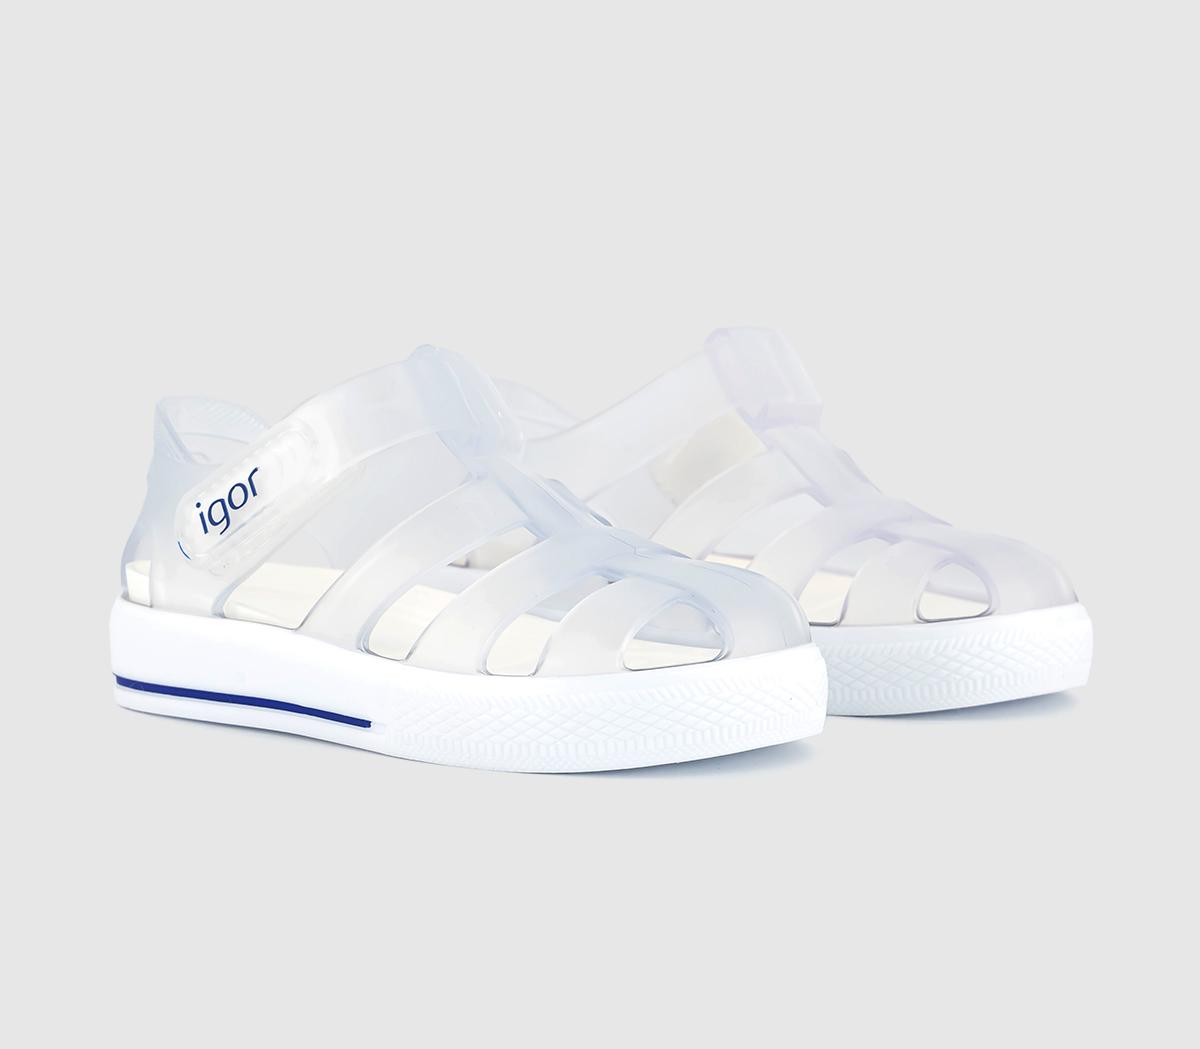 Igor Kids Clear White Star Summer Sandals, Perfect For The Hot Sand Or Poolside, Size: 7 Infant